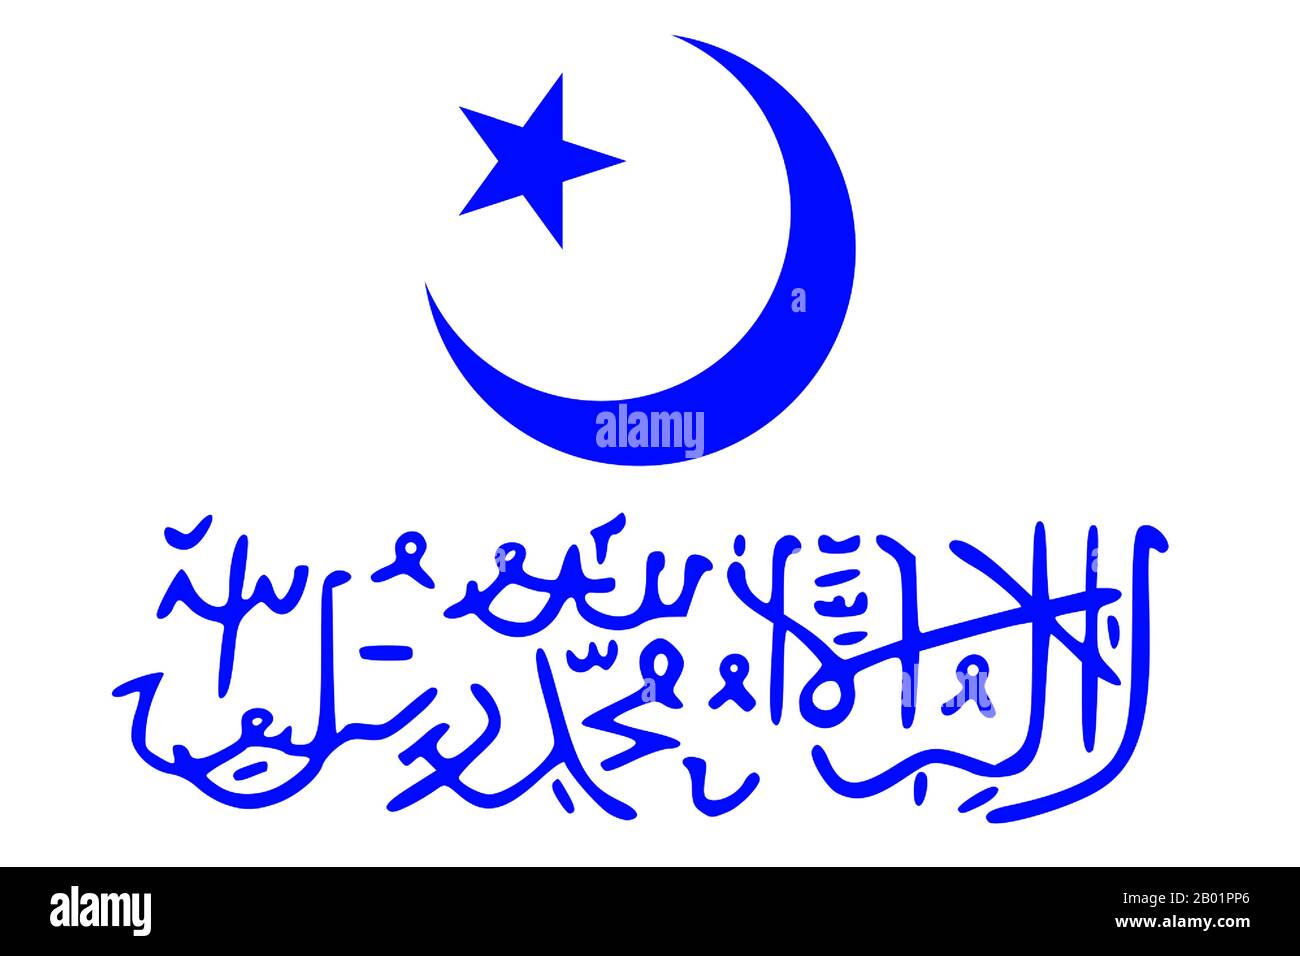 China: The flag of the Turkish-Islamic Republic of Eastern Turkestan (First East Turkestan Republic), Xinjiang, 1933-1934.  The First Eastern Turkestan Republic (ETR), or Turkish Islamic Republic of East Turkestan (TIRET), also Republic of Uyghurstan, (Sherqiy Türkistan Yislam Jumuhuriyiti or Sarki Turk Islam Cumhuriyeti) was a short-lived breakaway would-be Islamic republic founded in 1933. It was centred on the city of Khotan in what is today the People's Republic of China-administered Xinjiang Uyghur Autonomous Region. Stock Photo